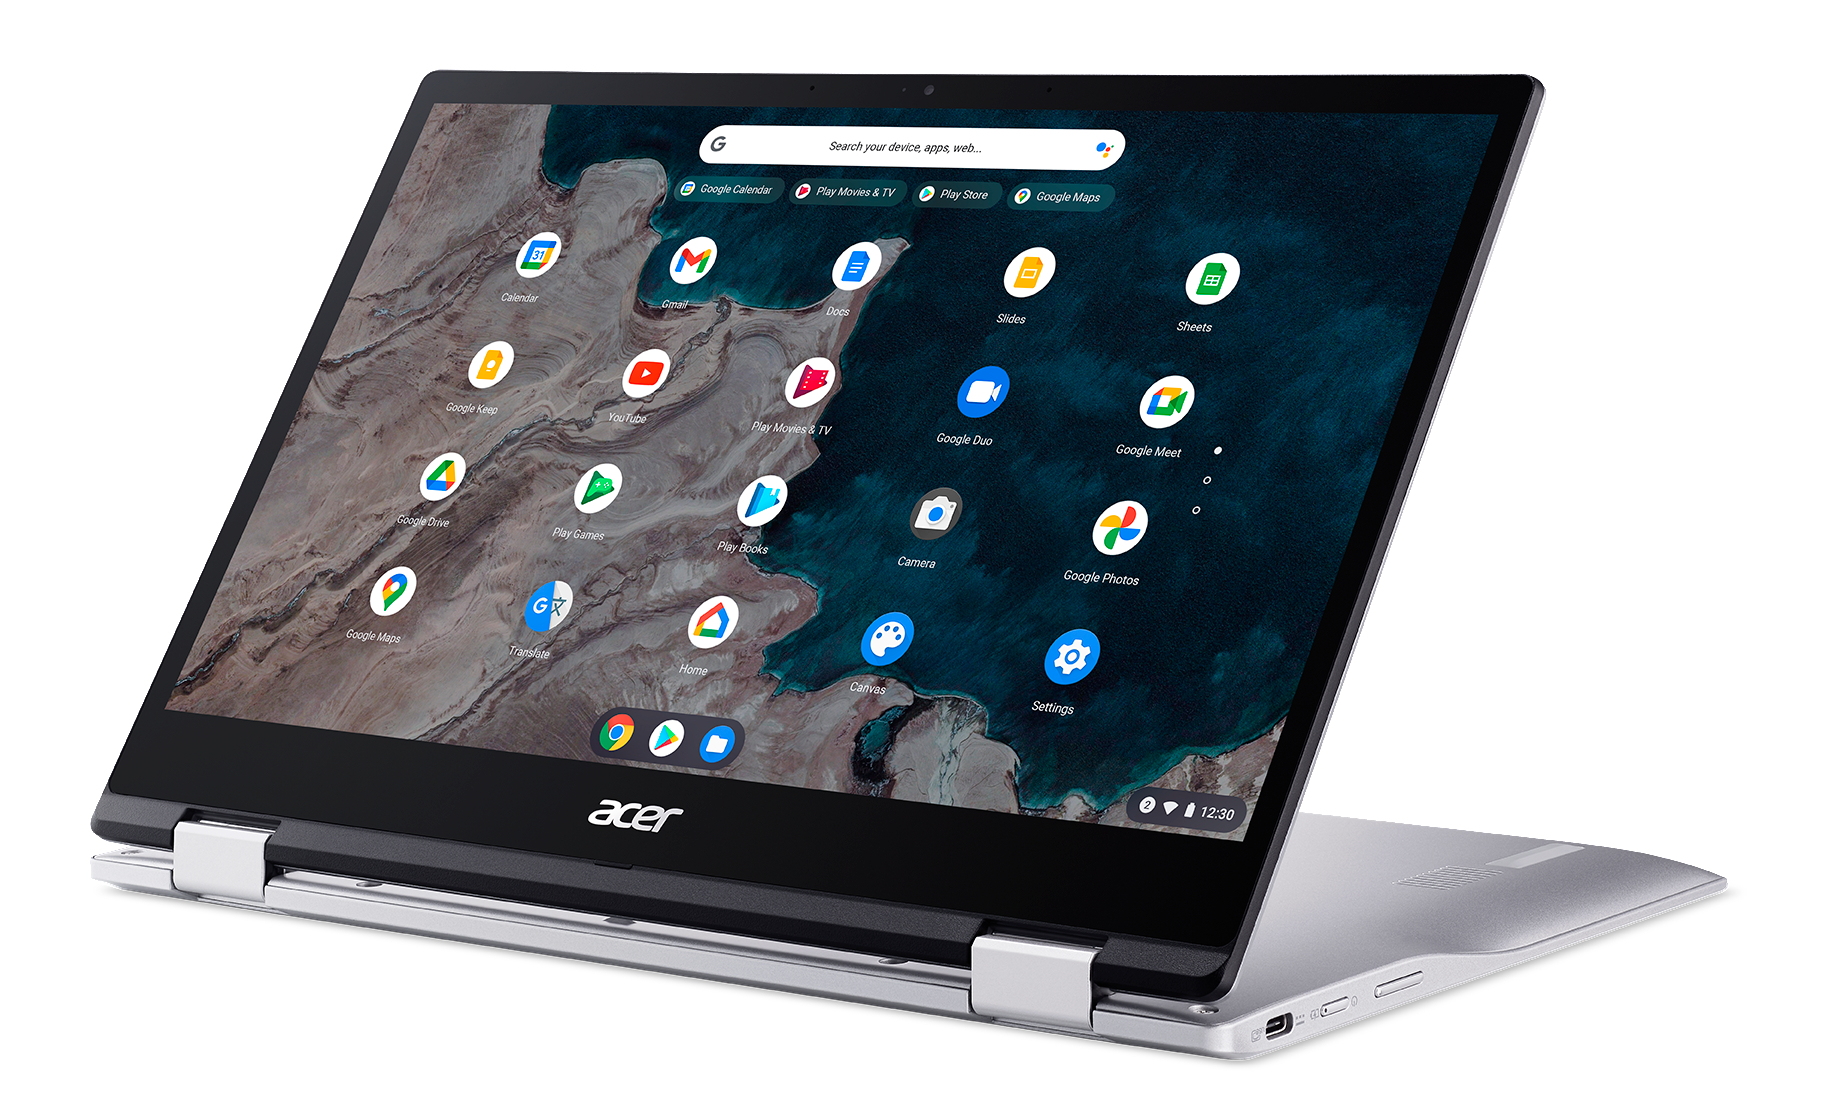 RAM, Spin Chromebook Tastaturbeleuchtung, 4 OS Graphics, mit mit Touchscreen, Zoll Chrome ACER Prozessor, GB Adreno™ Google Chromebook, 64 Silber eMMC, (CP513-1H-S72Y) Display Qualcomm 13,3 513 GB 7c Onboard